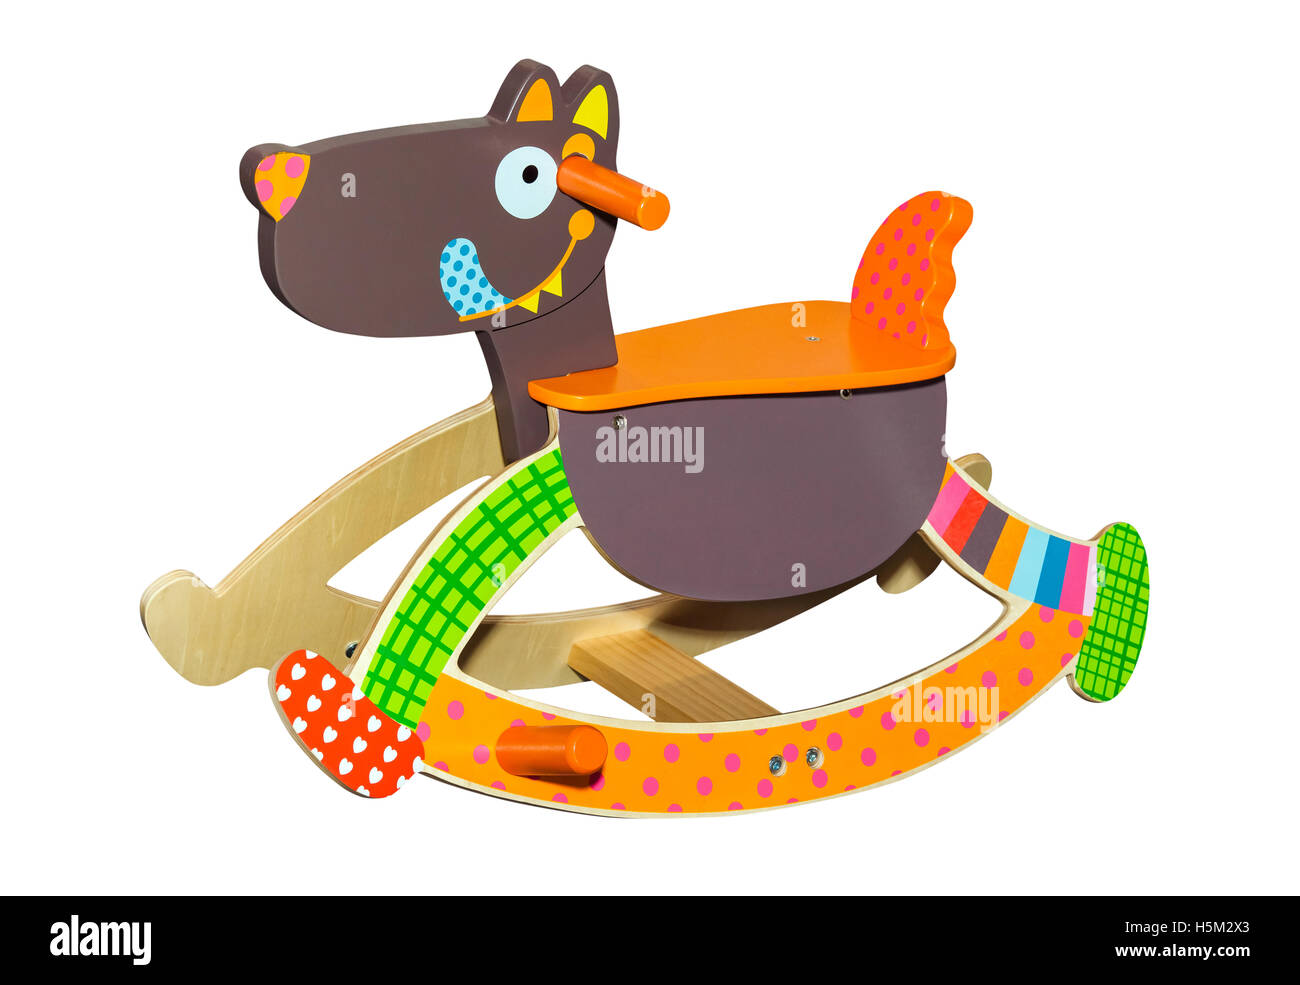 Toy dog rocking chair Stock Photo